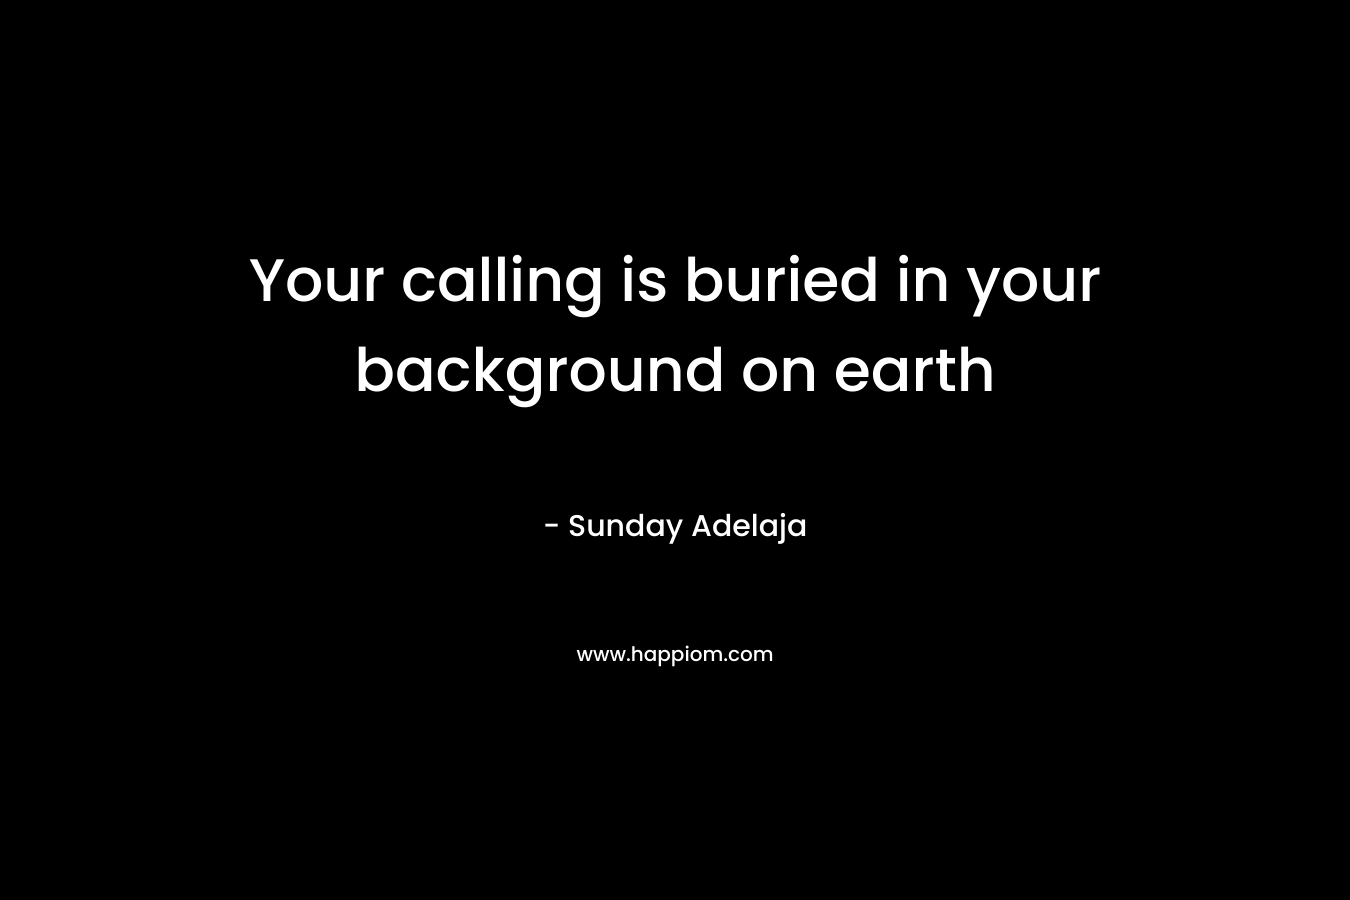 Your calling is buried in your background on earth